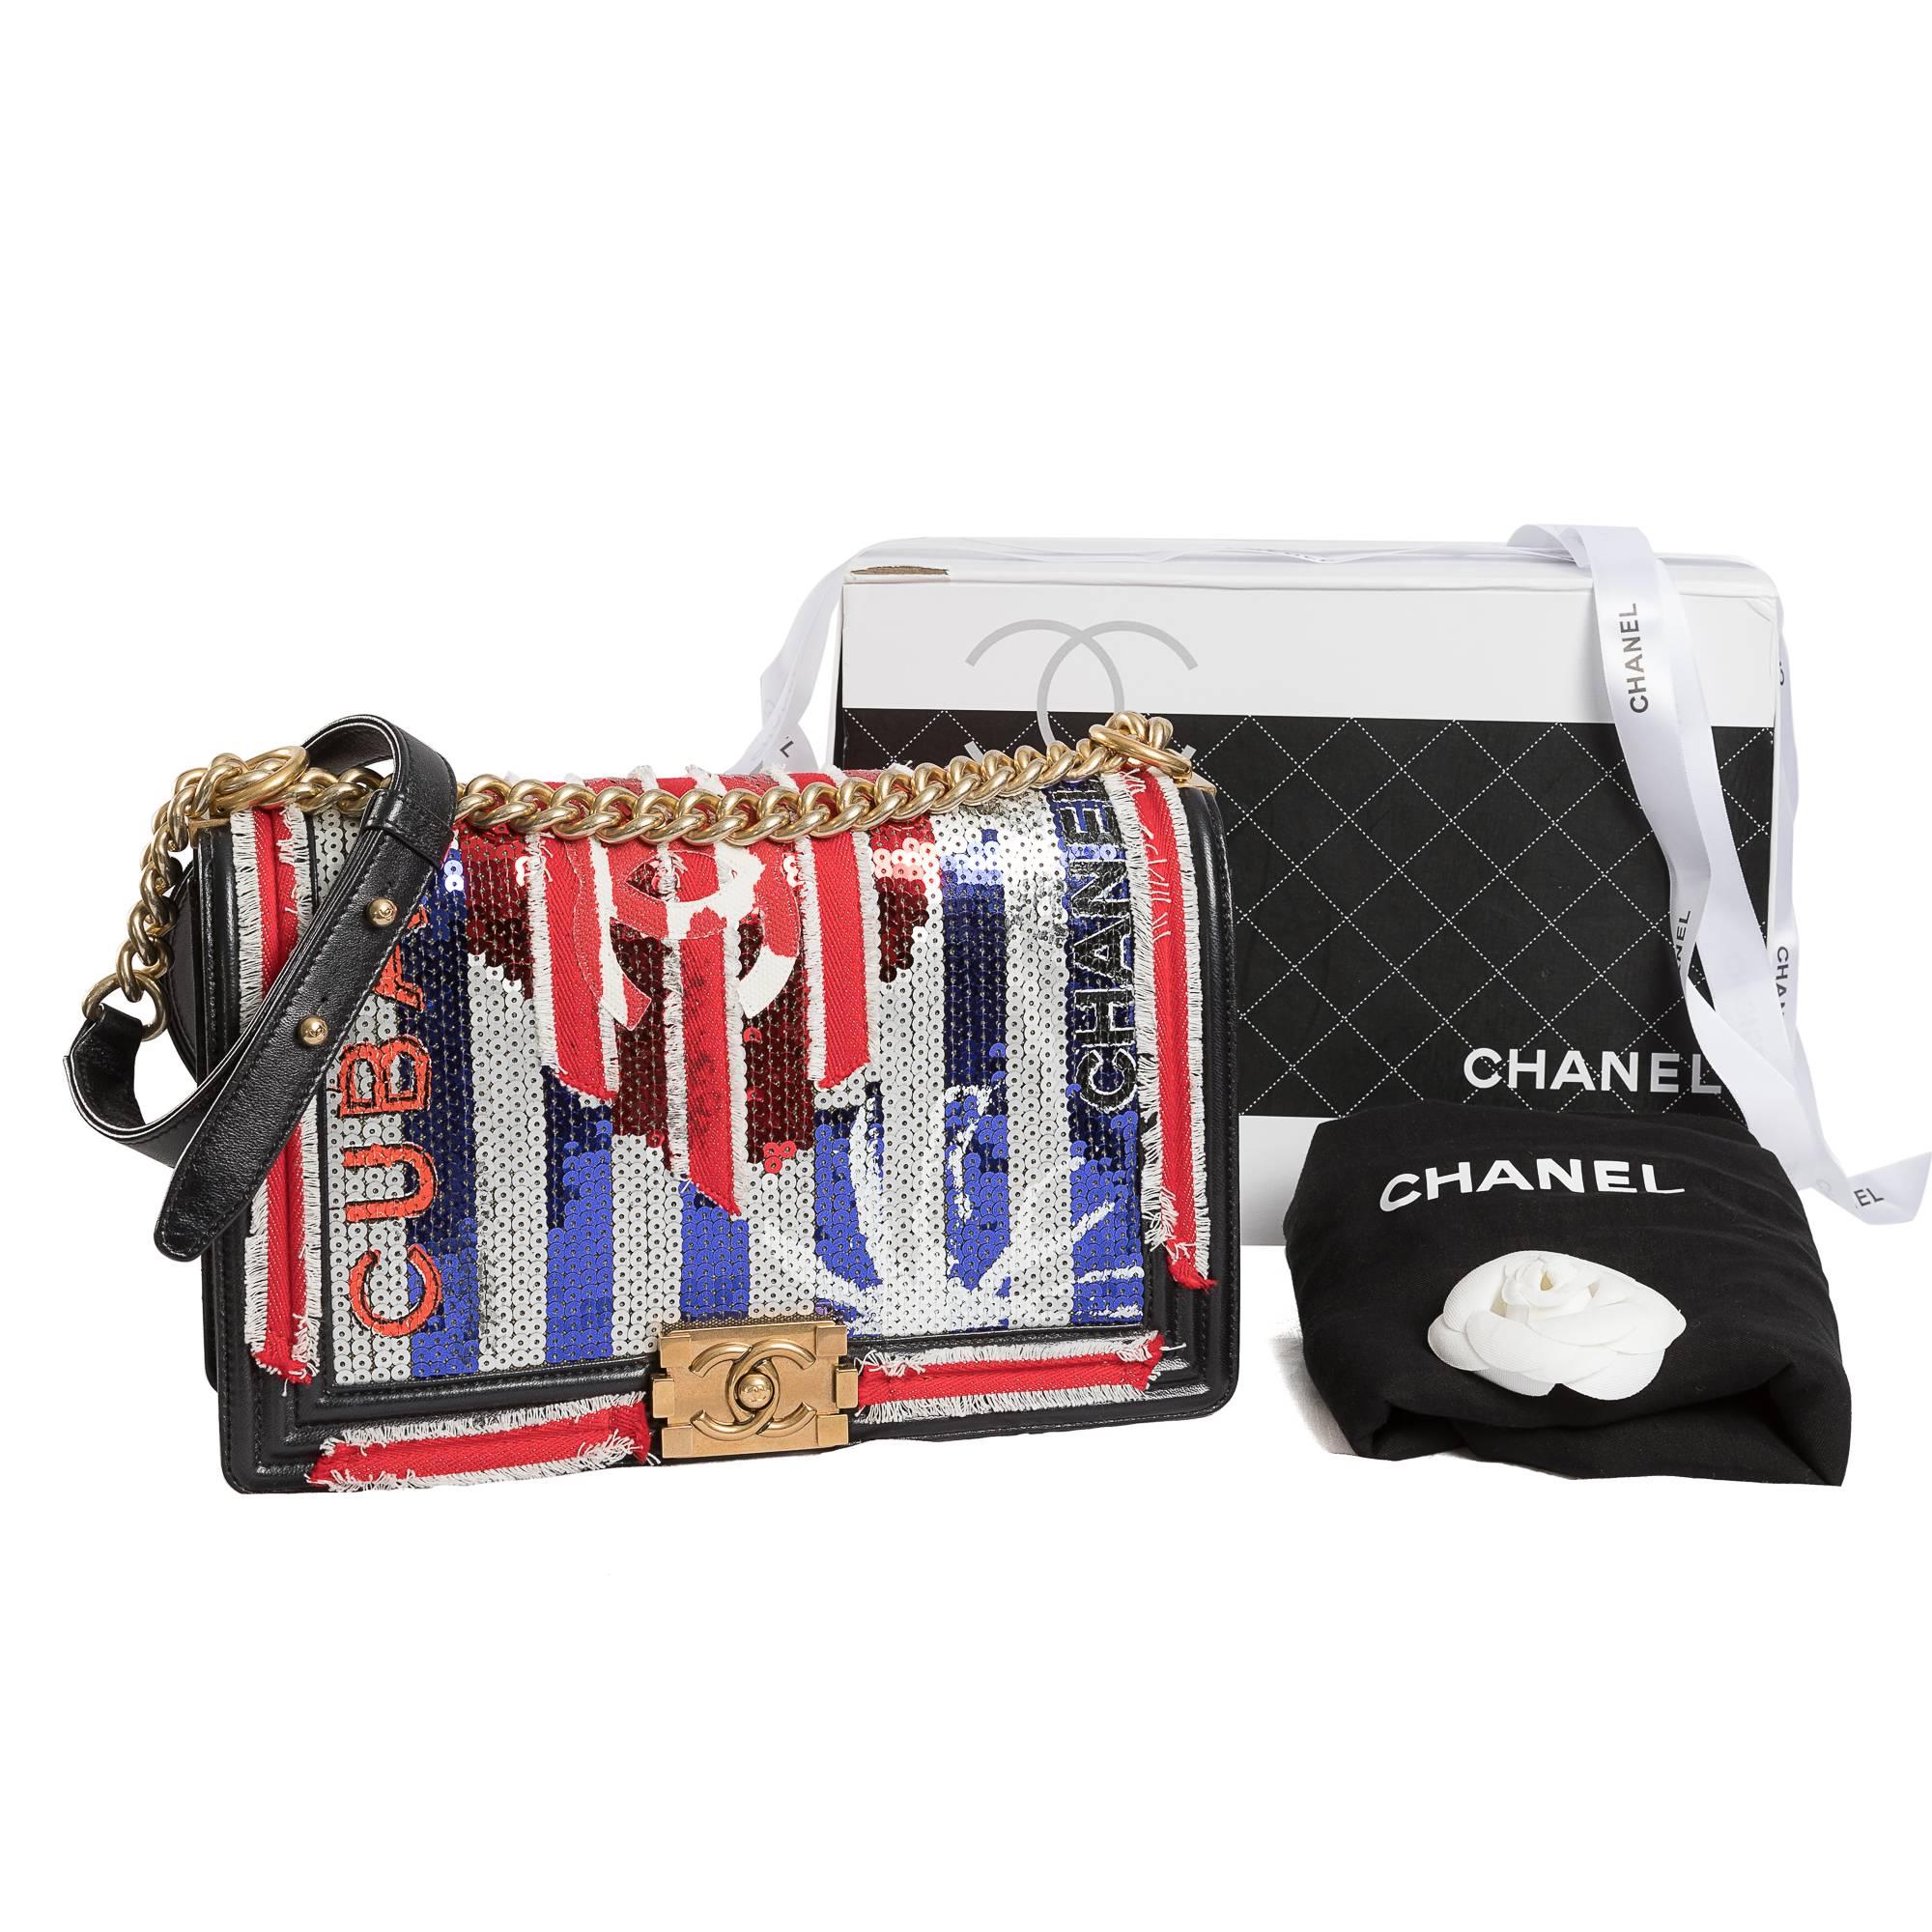 Chanel Cuba Collectors Item New Never Worn For Sale 2